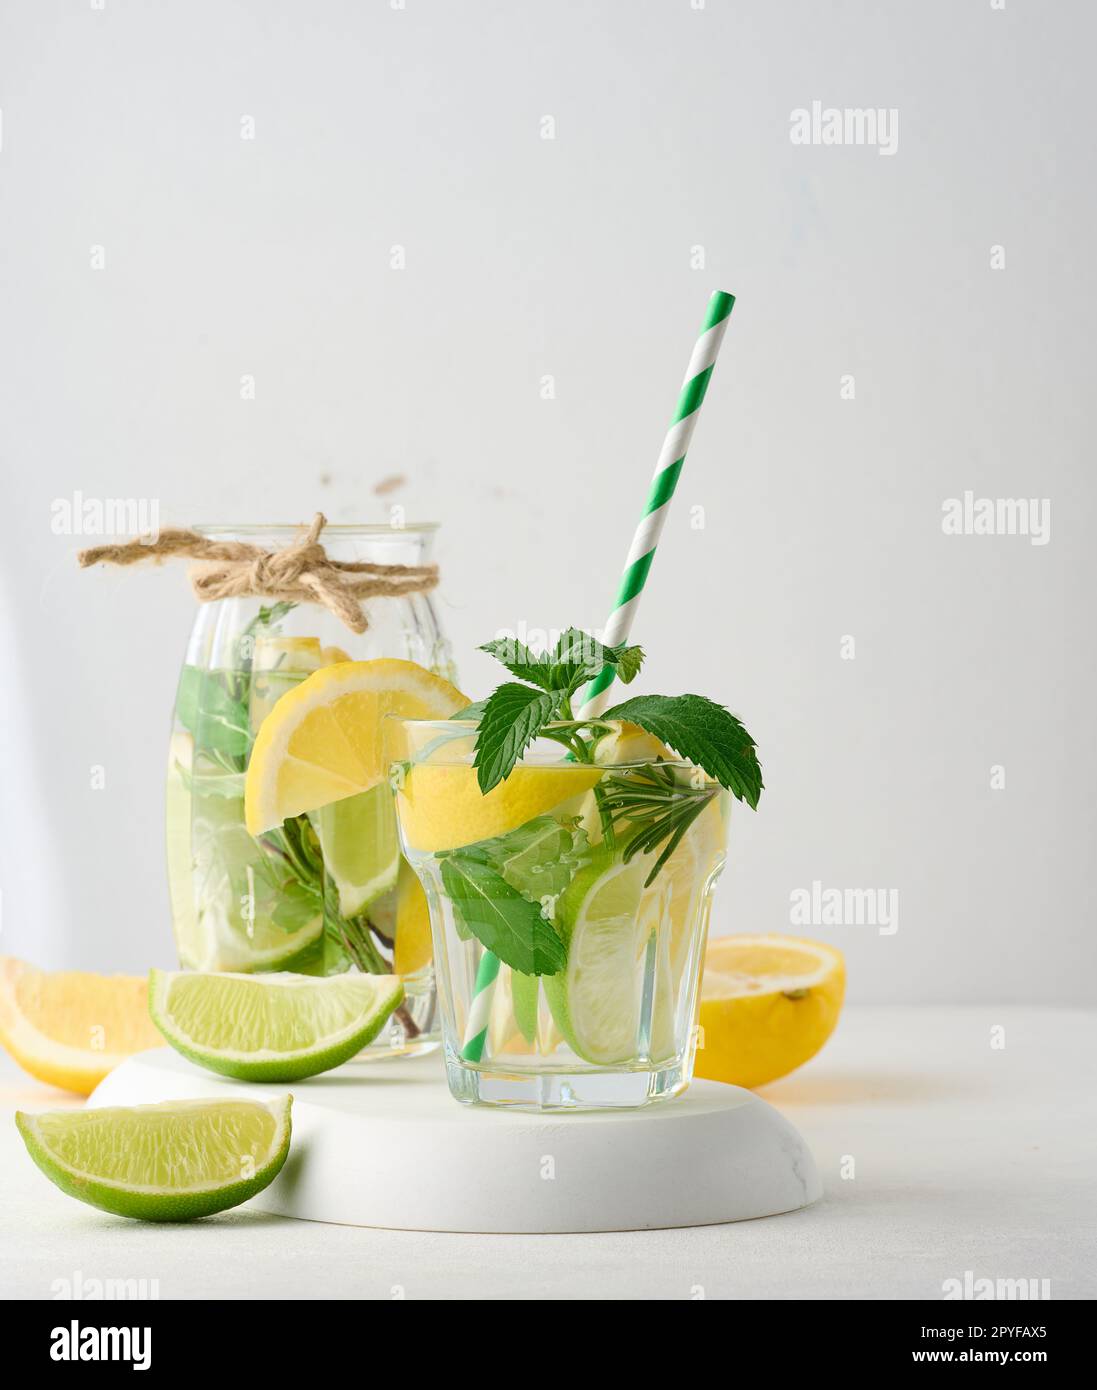 https://c8.alamy.com/comp/2PYFAX5/lemonade-in-a-transparent-glass-with-lemon-lime-rosemary-sprigs-and-mint-leaves-on-a-white-background-2PYFAX5.jpg